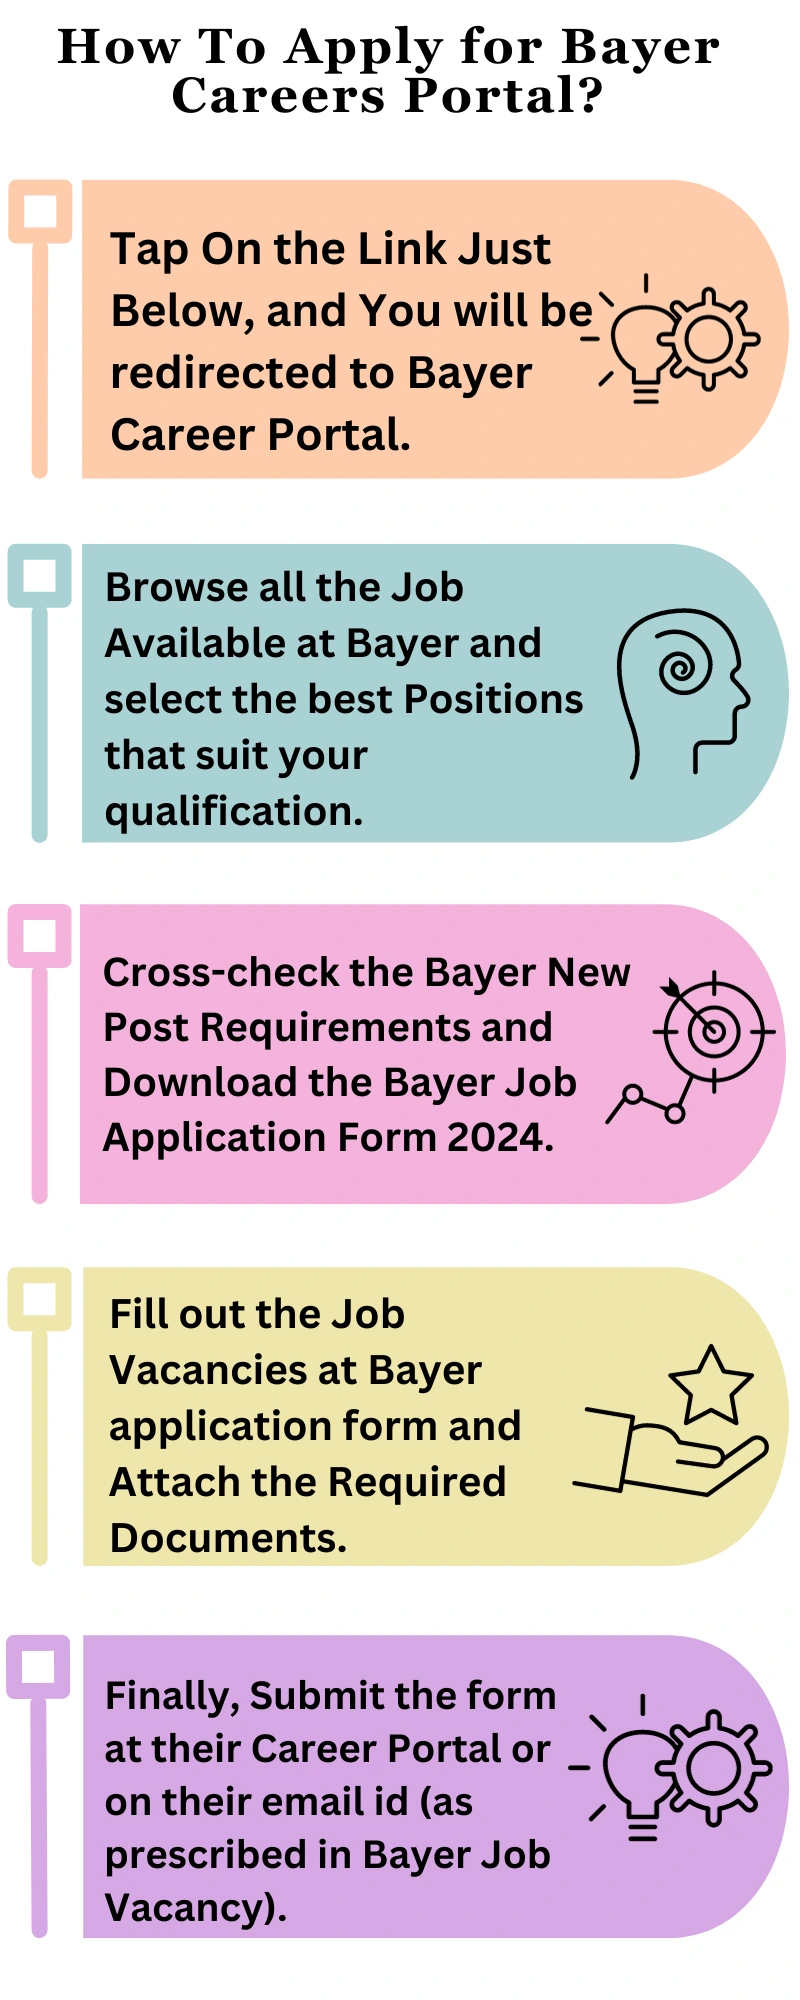 How To Apply for Bayer Careers Portal?